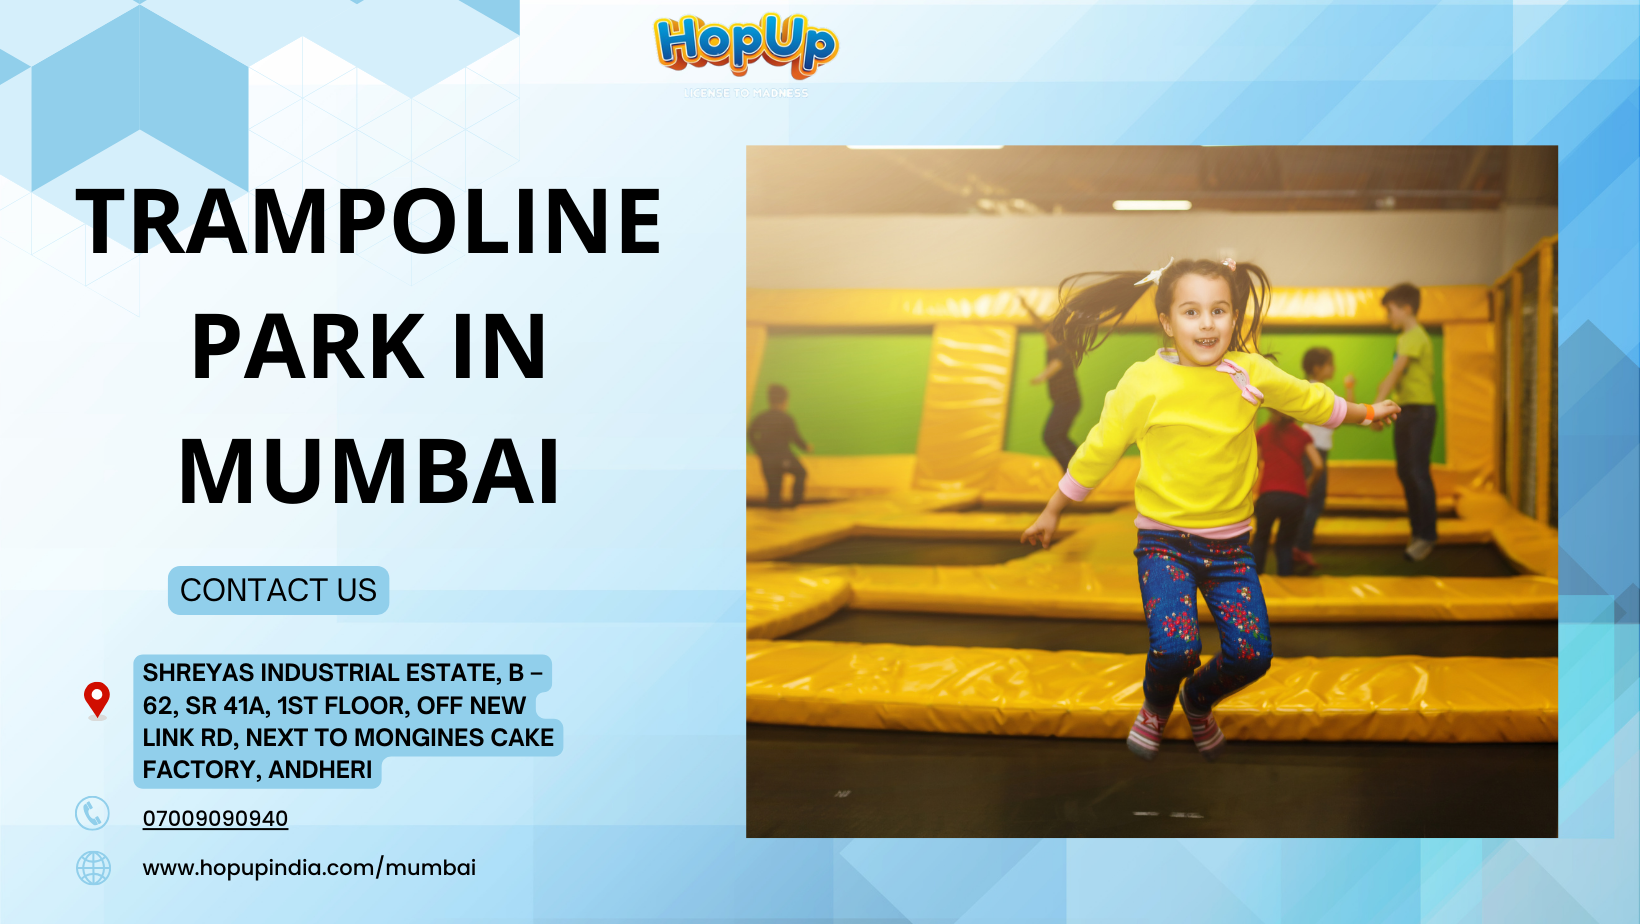 Bouncing Fun Experience the Thrills at Trampoline Park